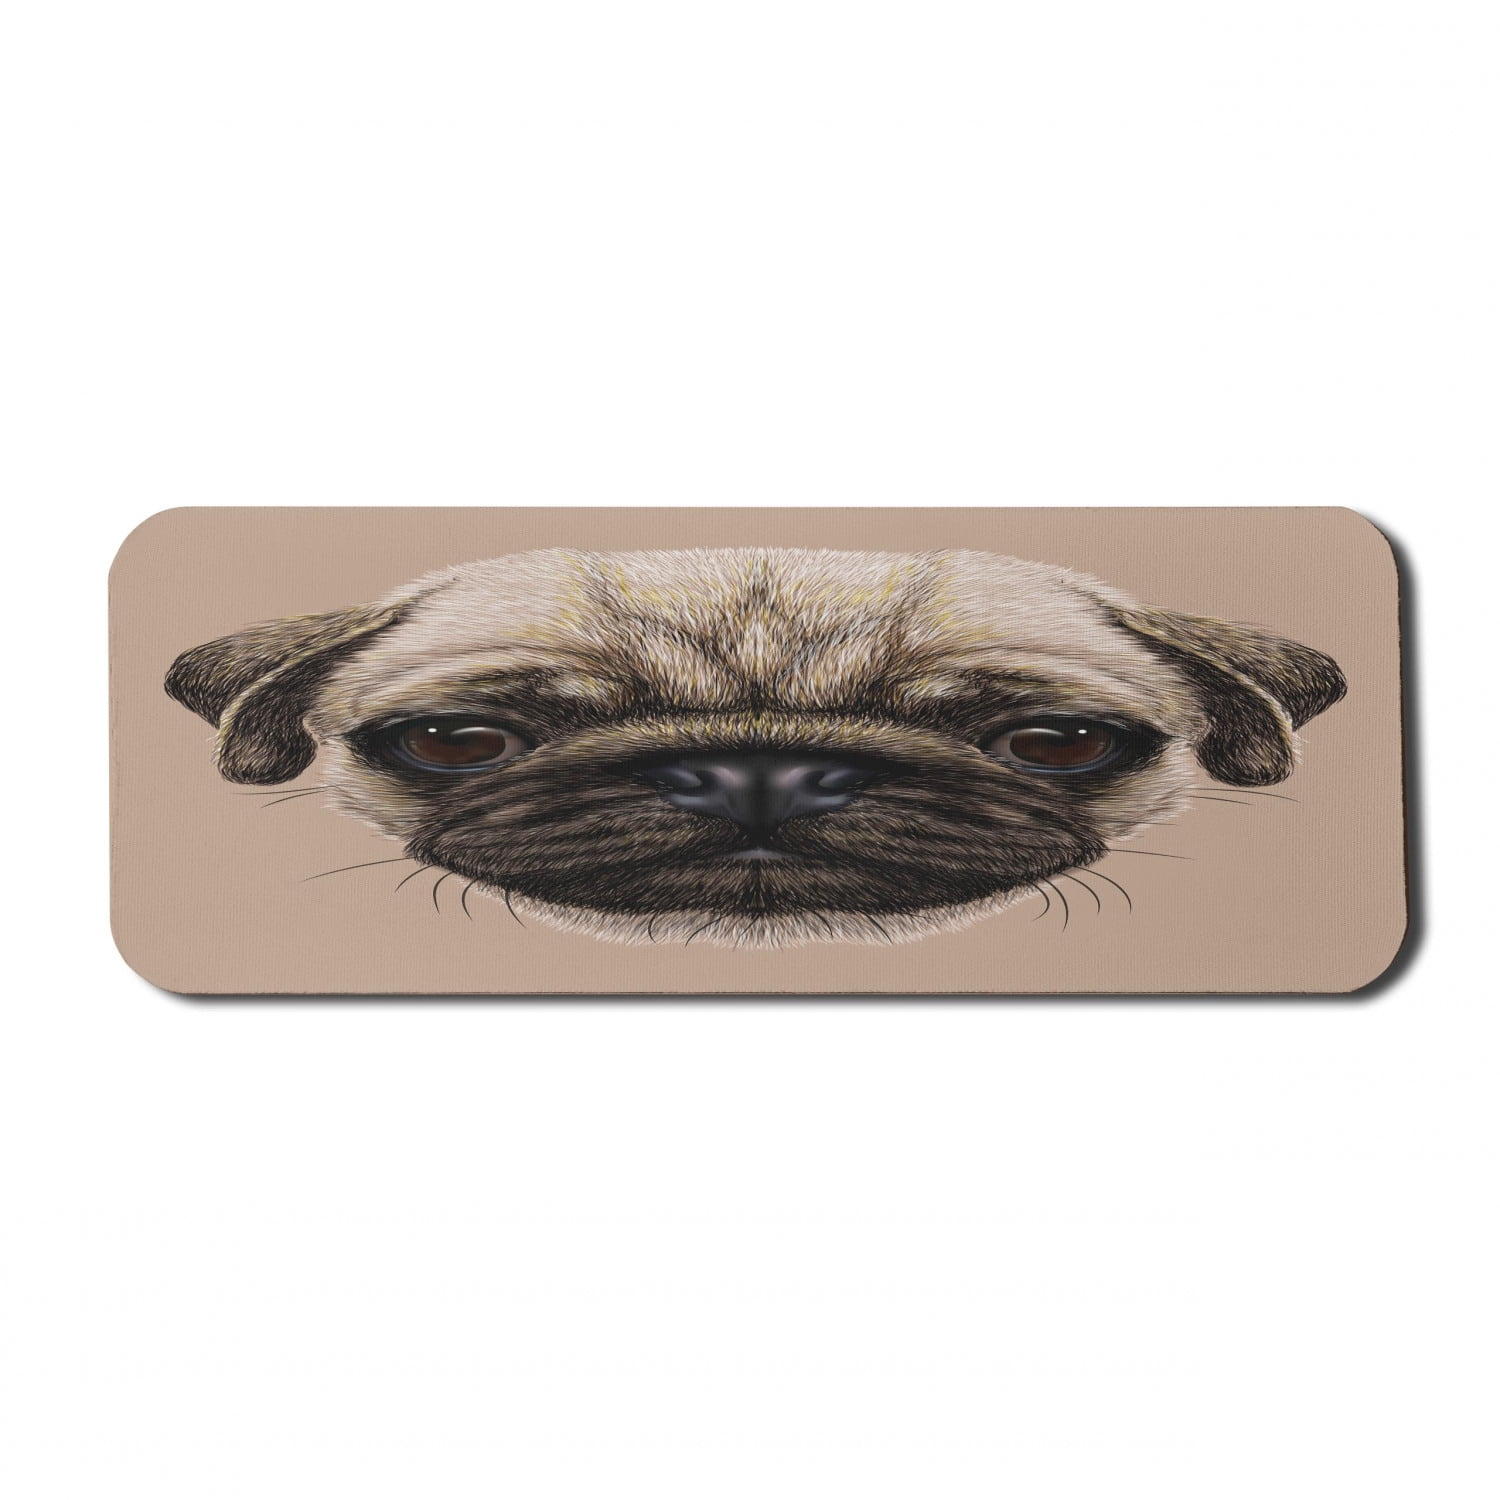 Rectangle Mouse Mat Handmade Gift Pug Dogs Office Decor Desk Accessory Mouse Pad MousePad Mouse Pads Computer Mouse Pad 